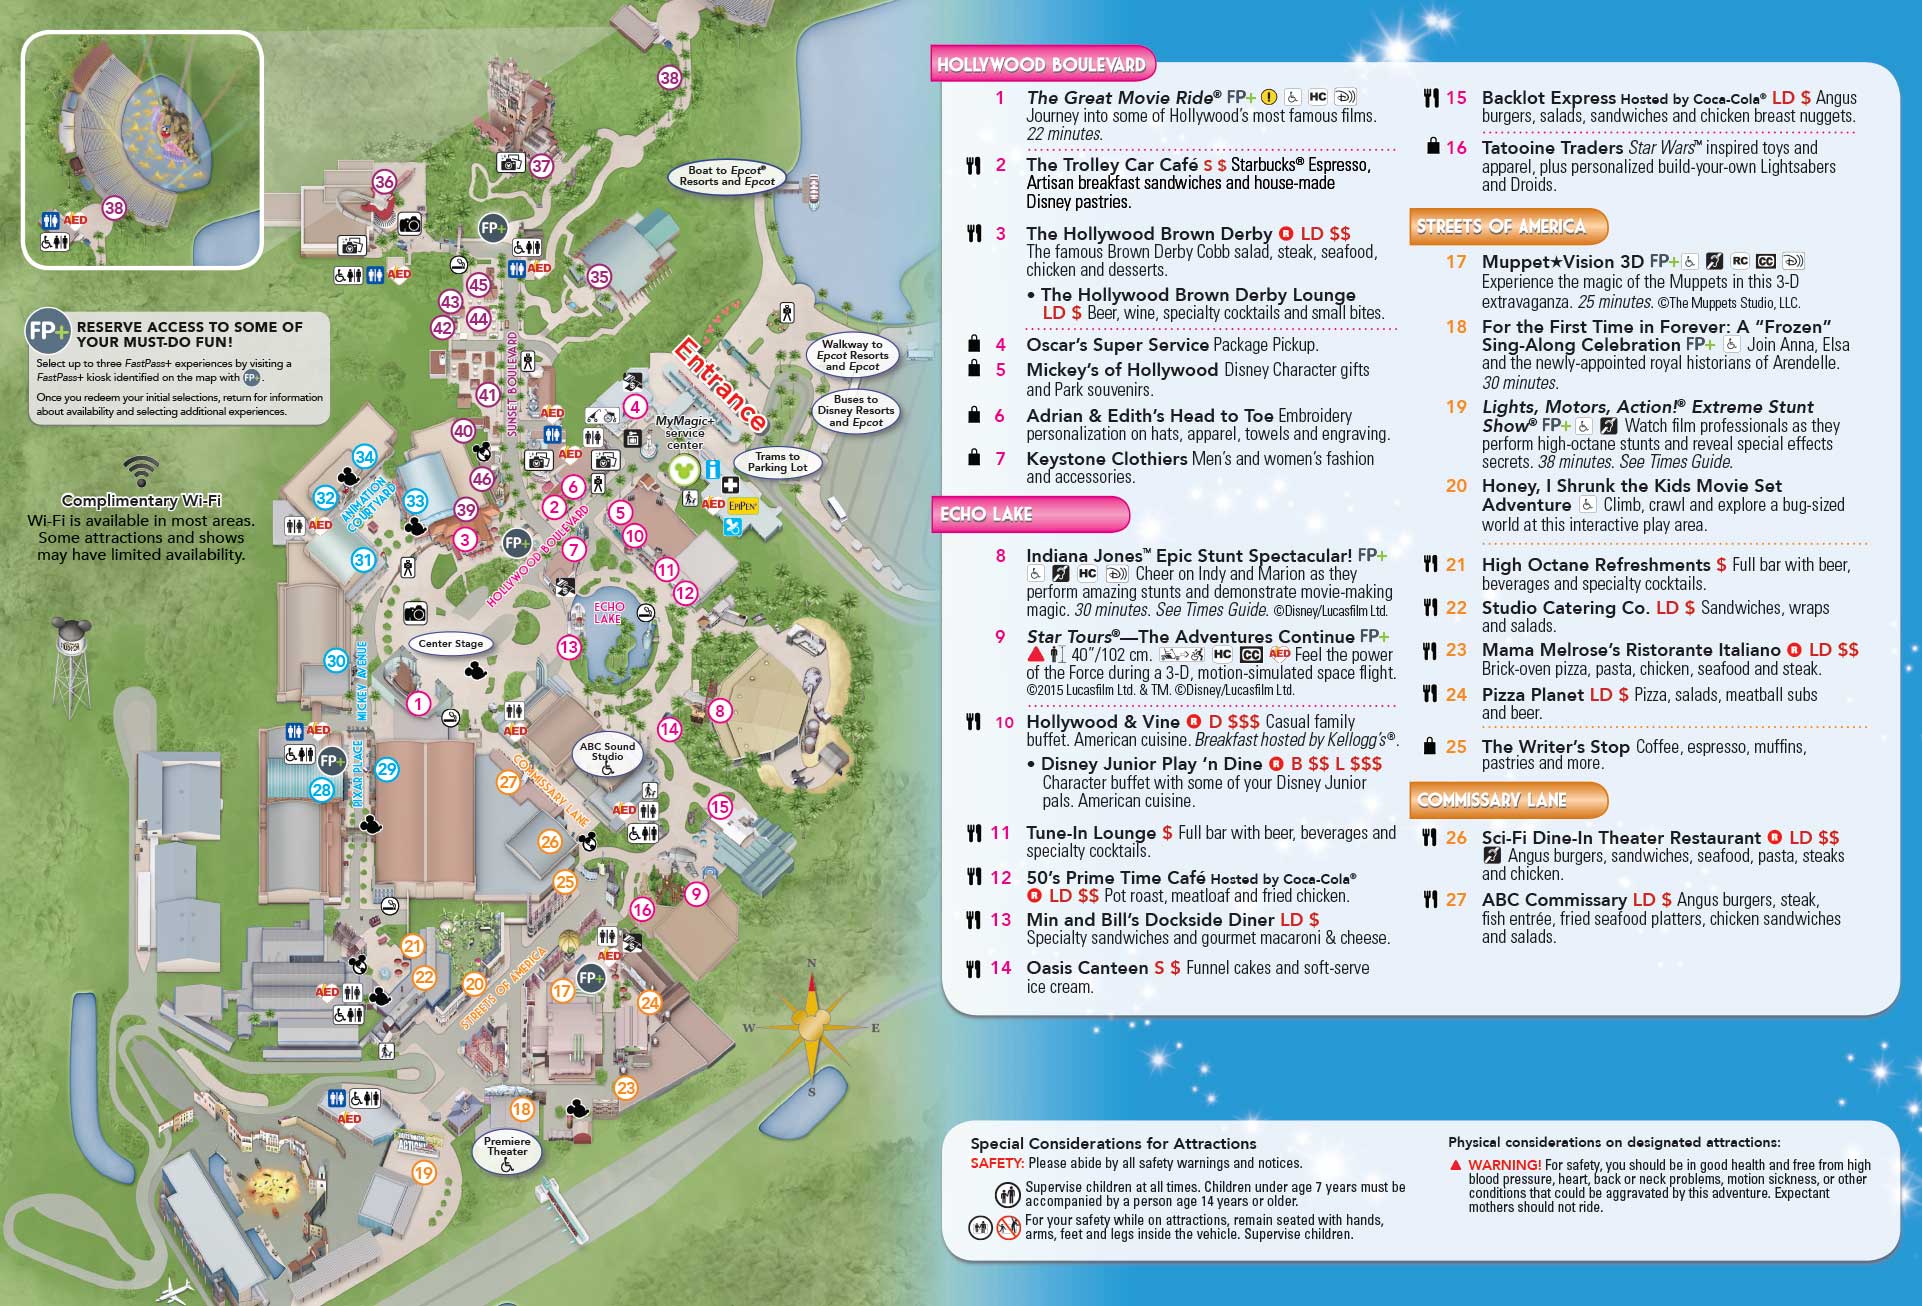 PHOTO - New Disney's Hollywood Studios guide map updated with Center